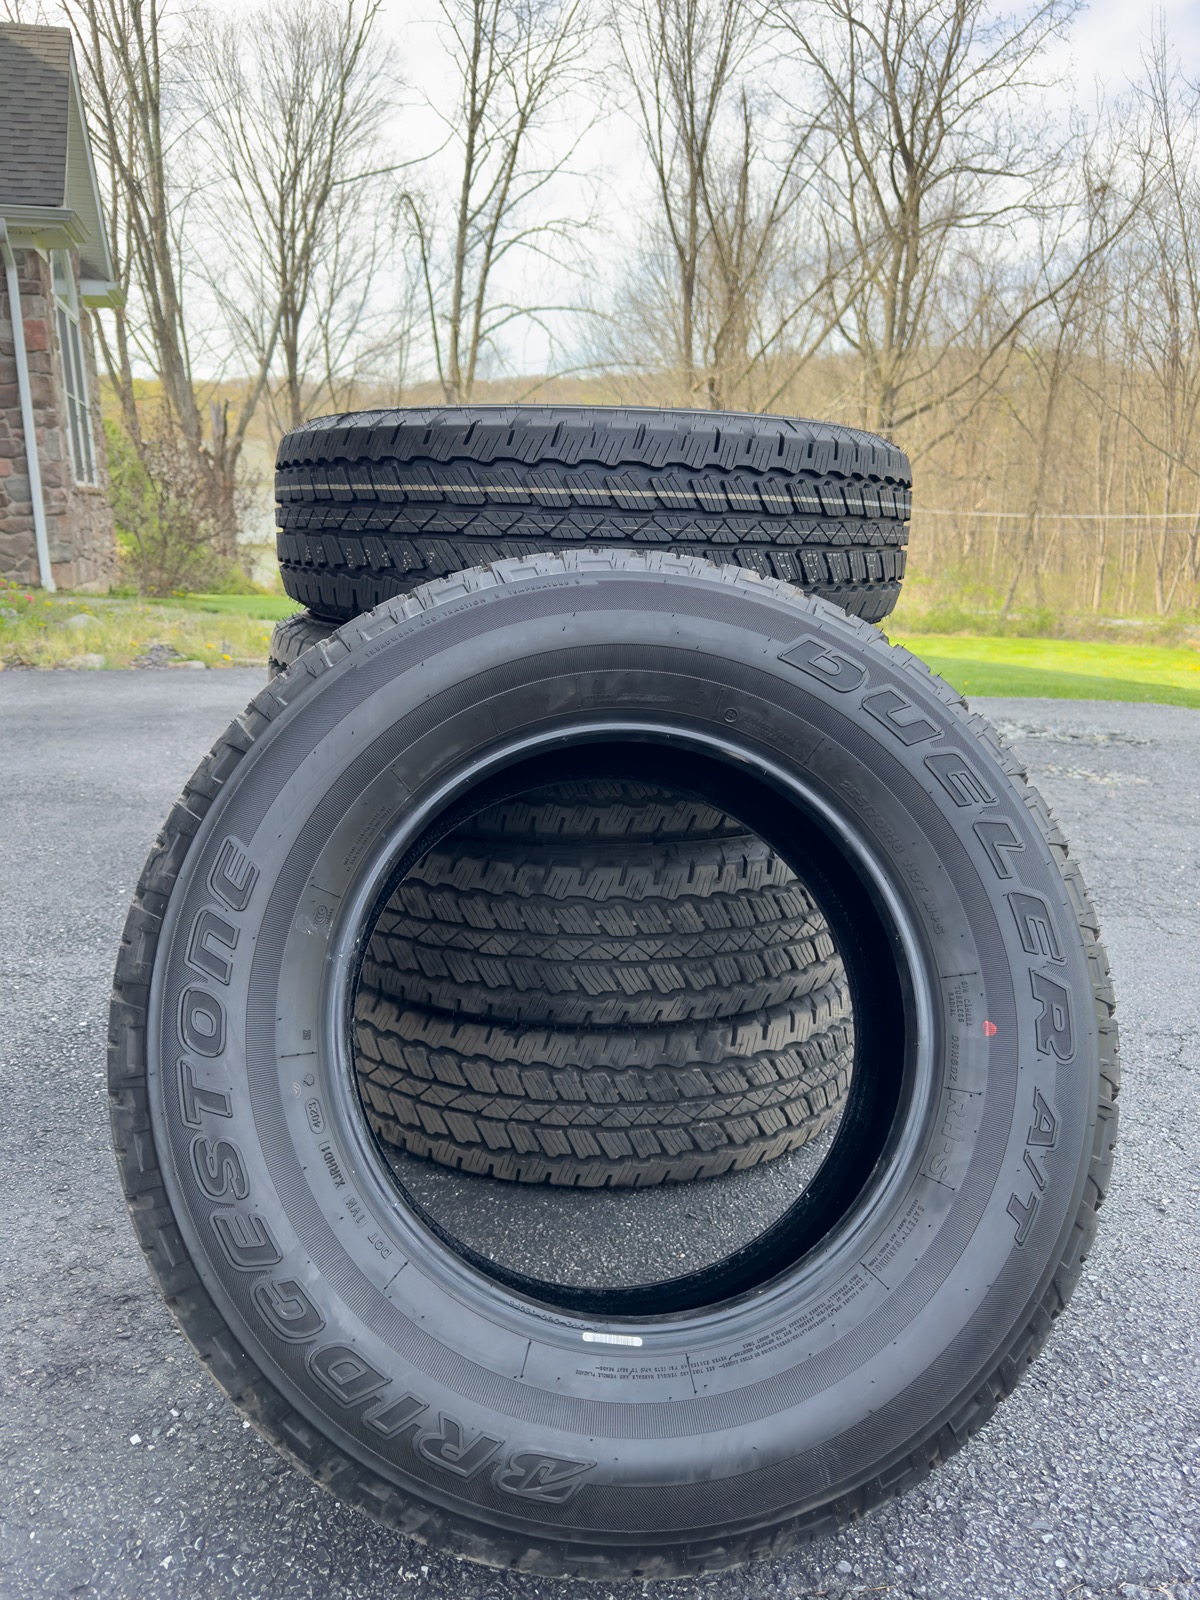 Ford Bronco Tires for Sale OBX Stock Bridgestone Dueler A/T RHS 255/70TR18 IMG_7466